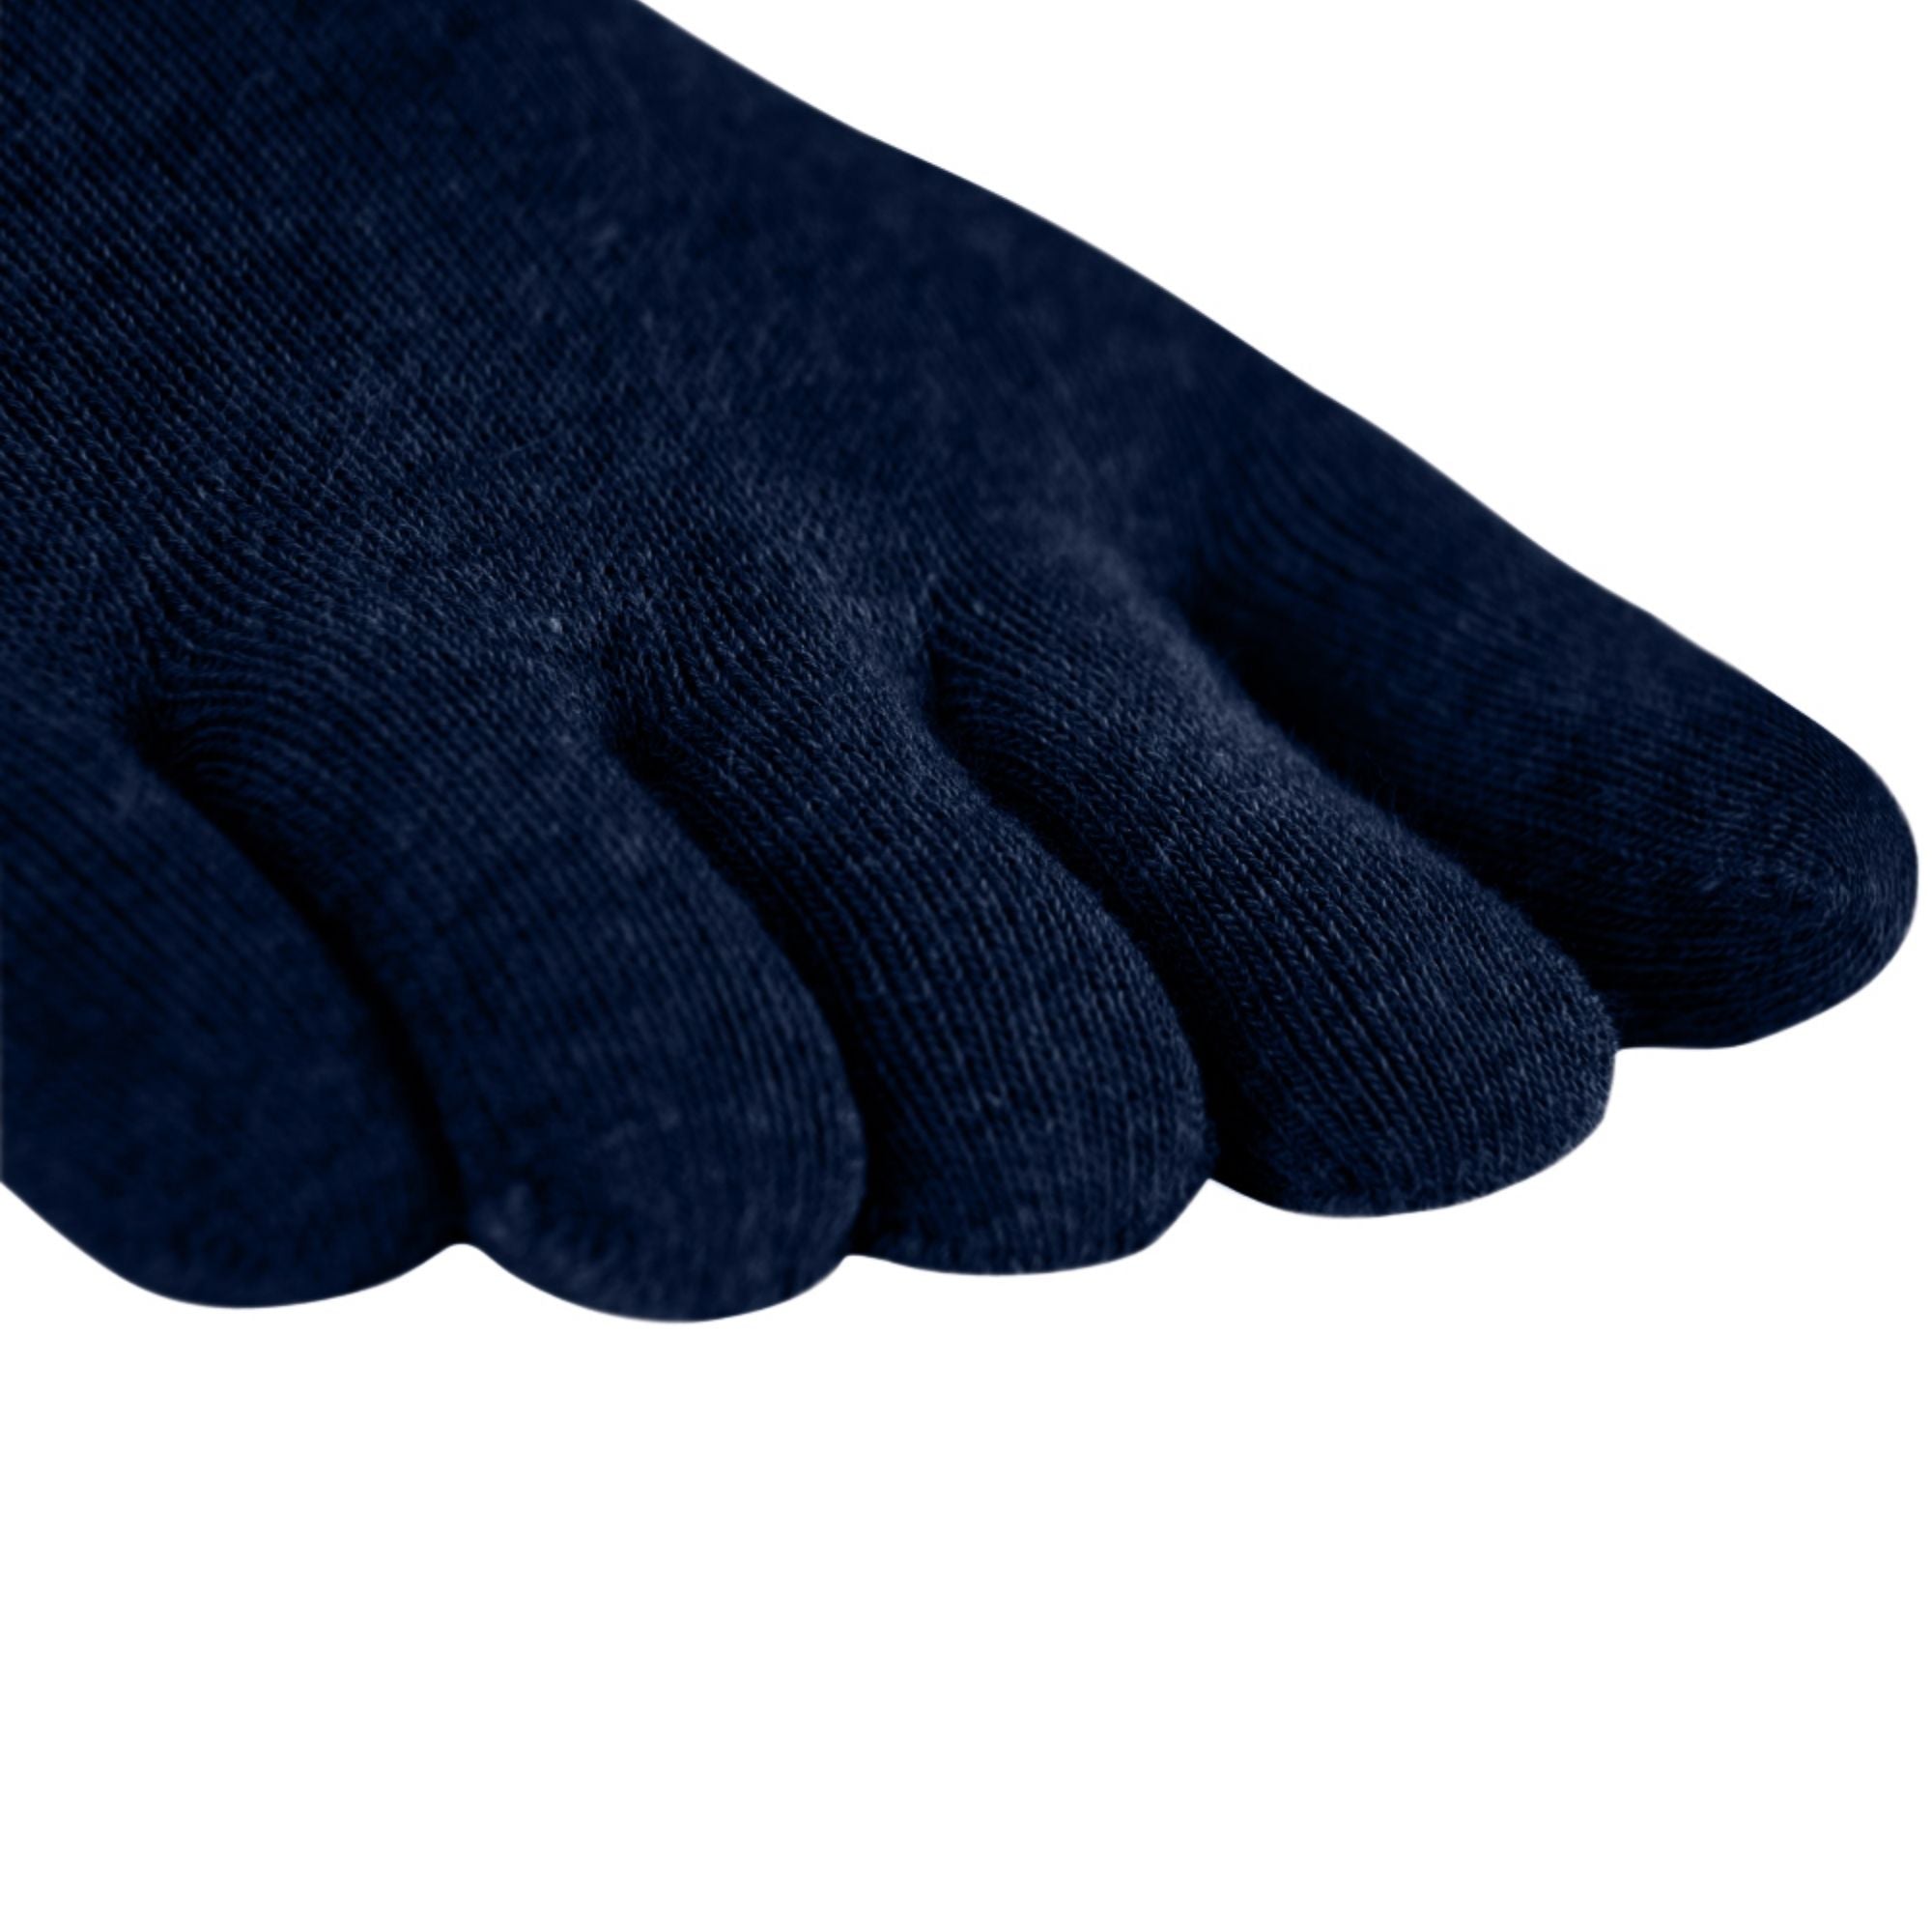 3-pack sports toe socks from Coolmax and cotton from Knitido in navy blue